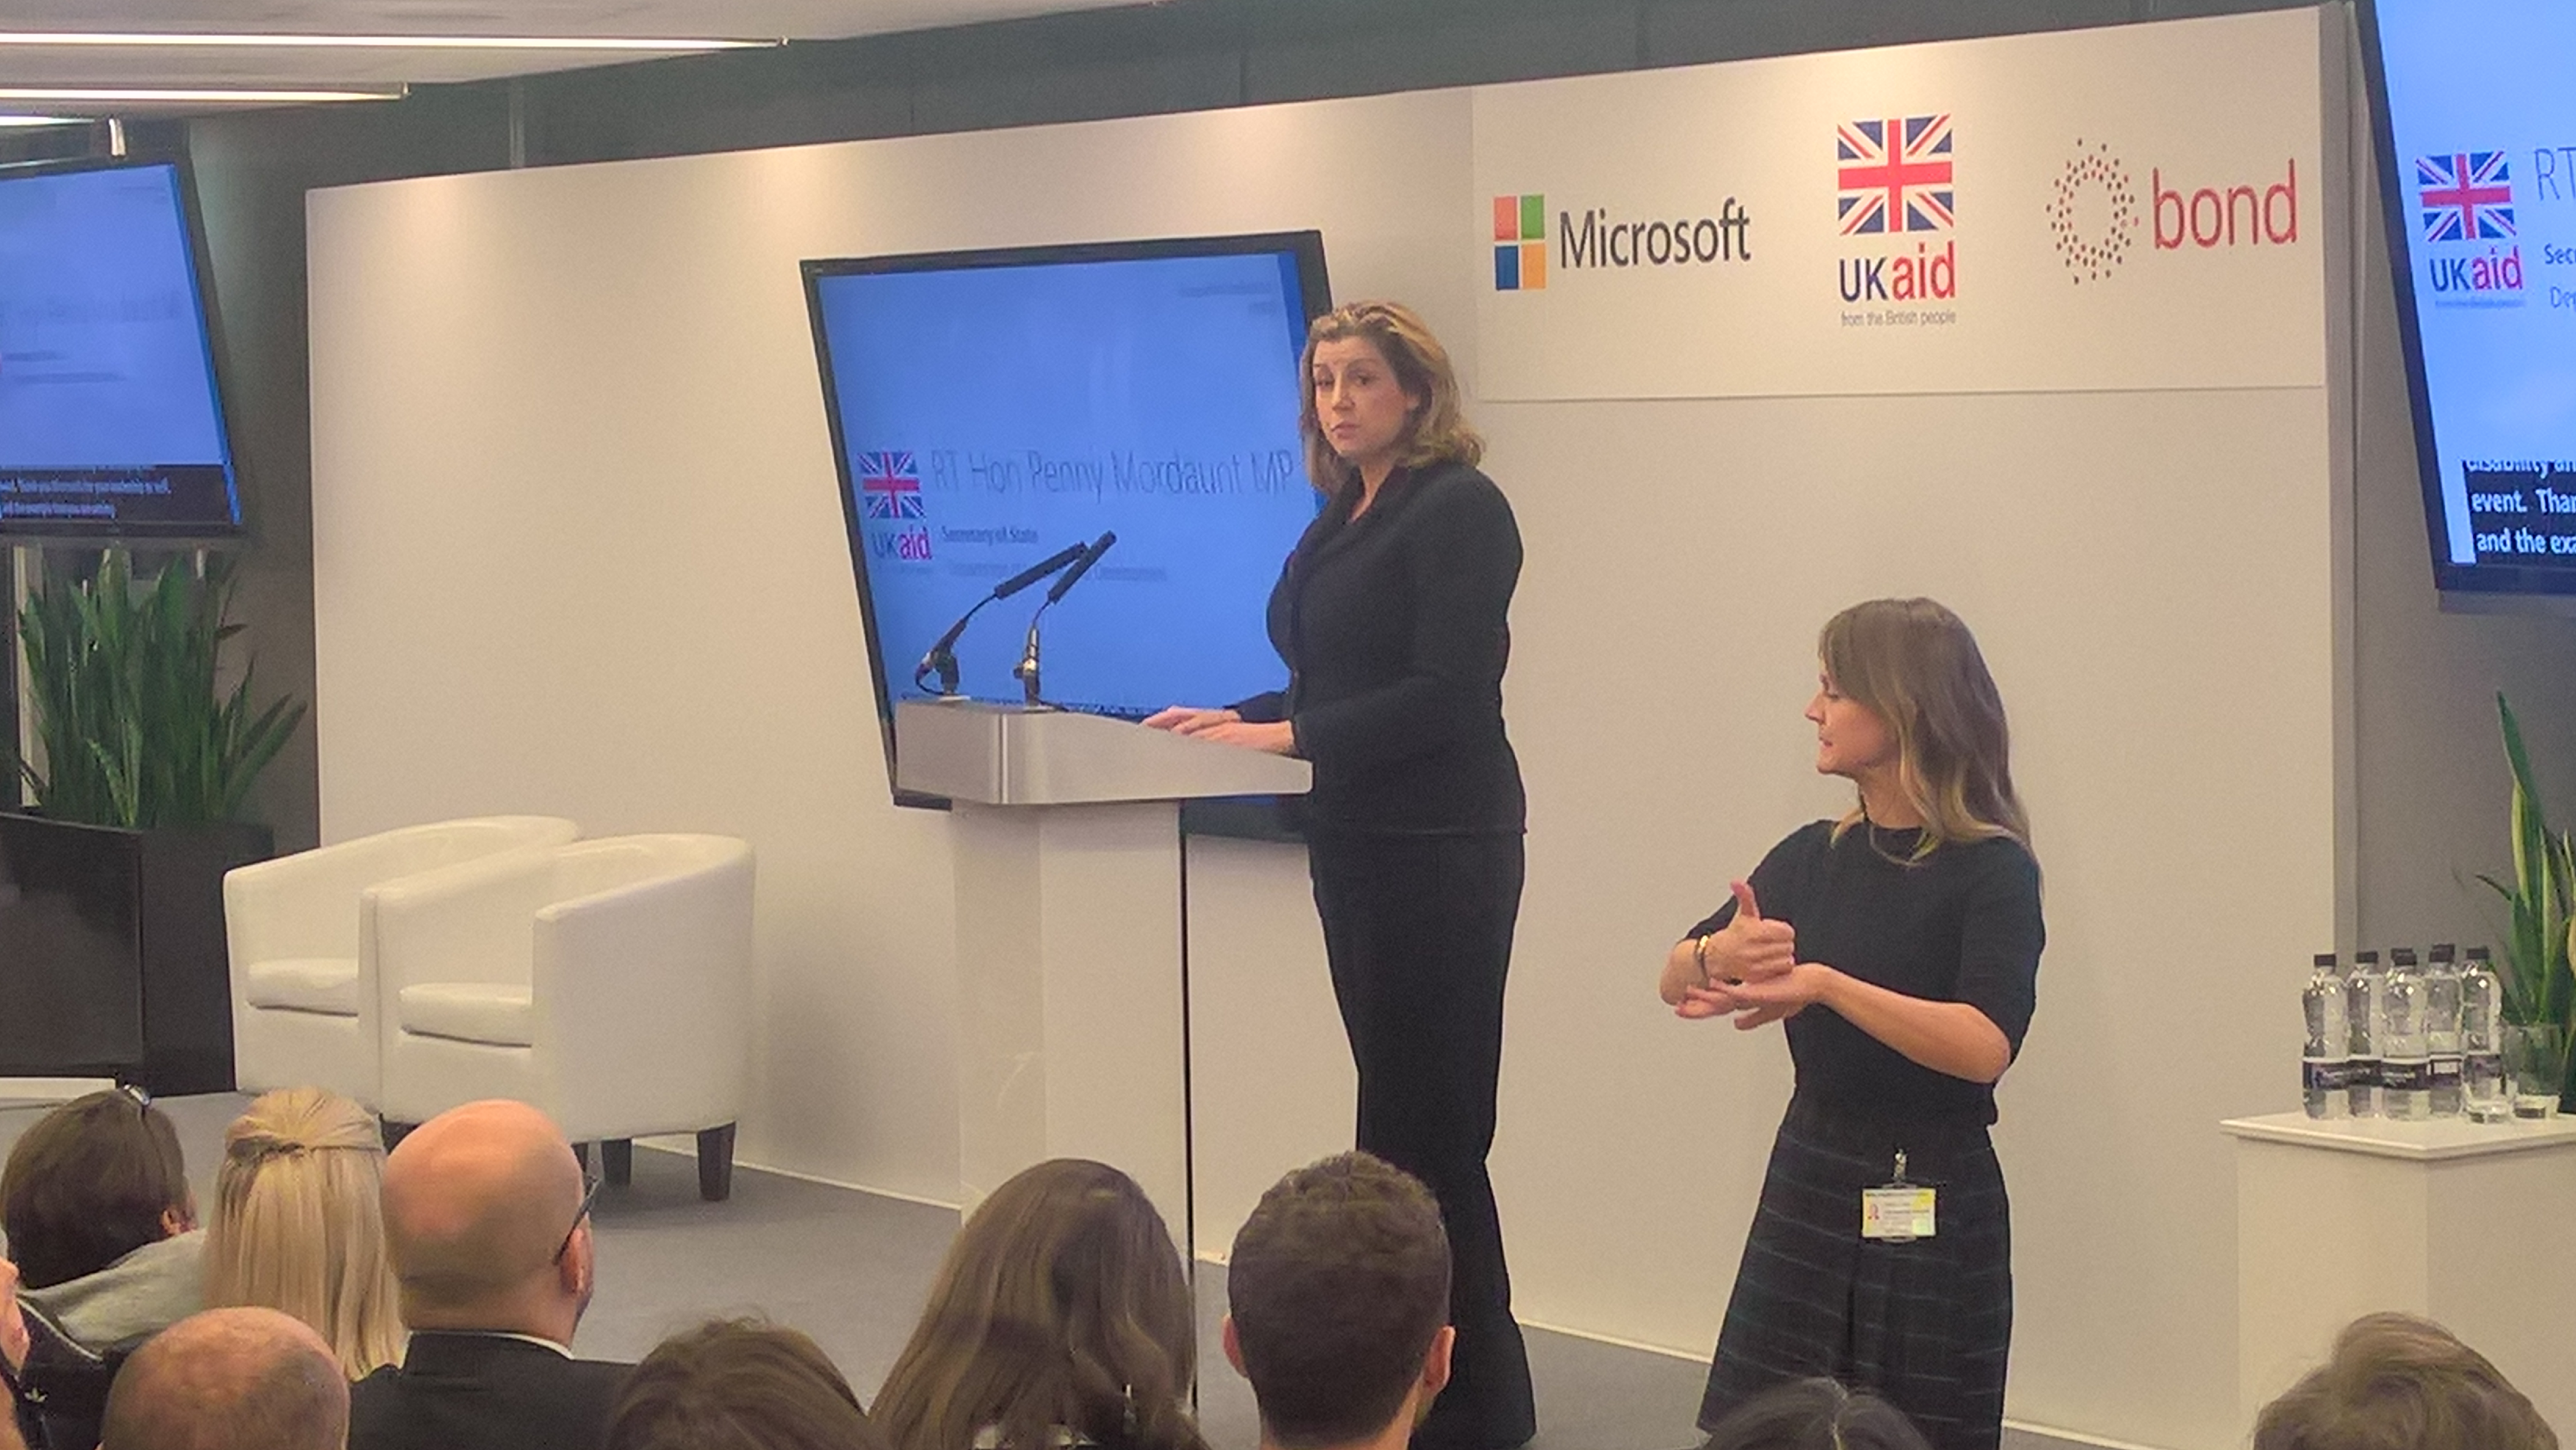 Penny Mordaunt, Secretary of State for International Development, speaks at an event at Microsoft's office in London